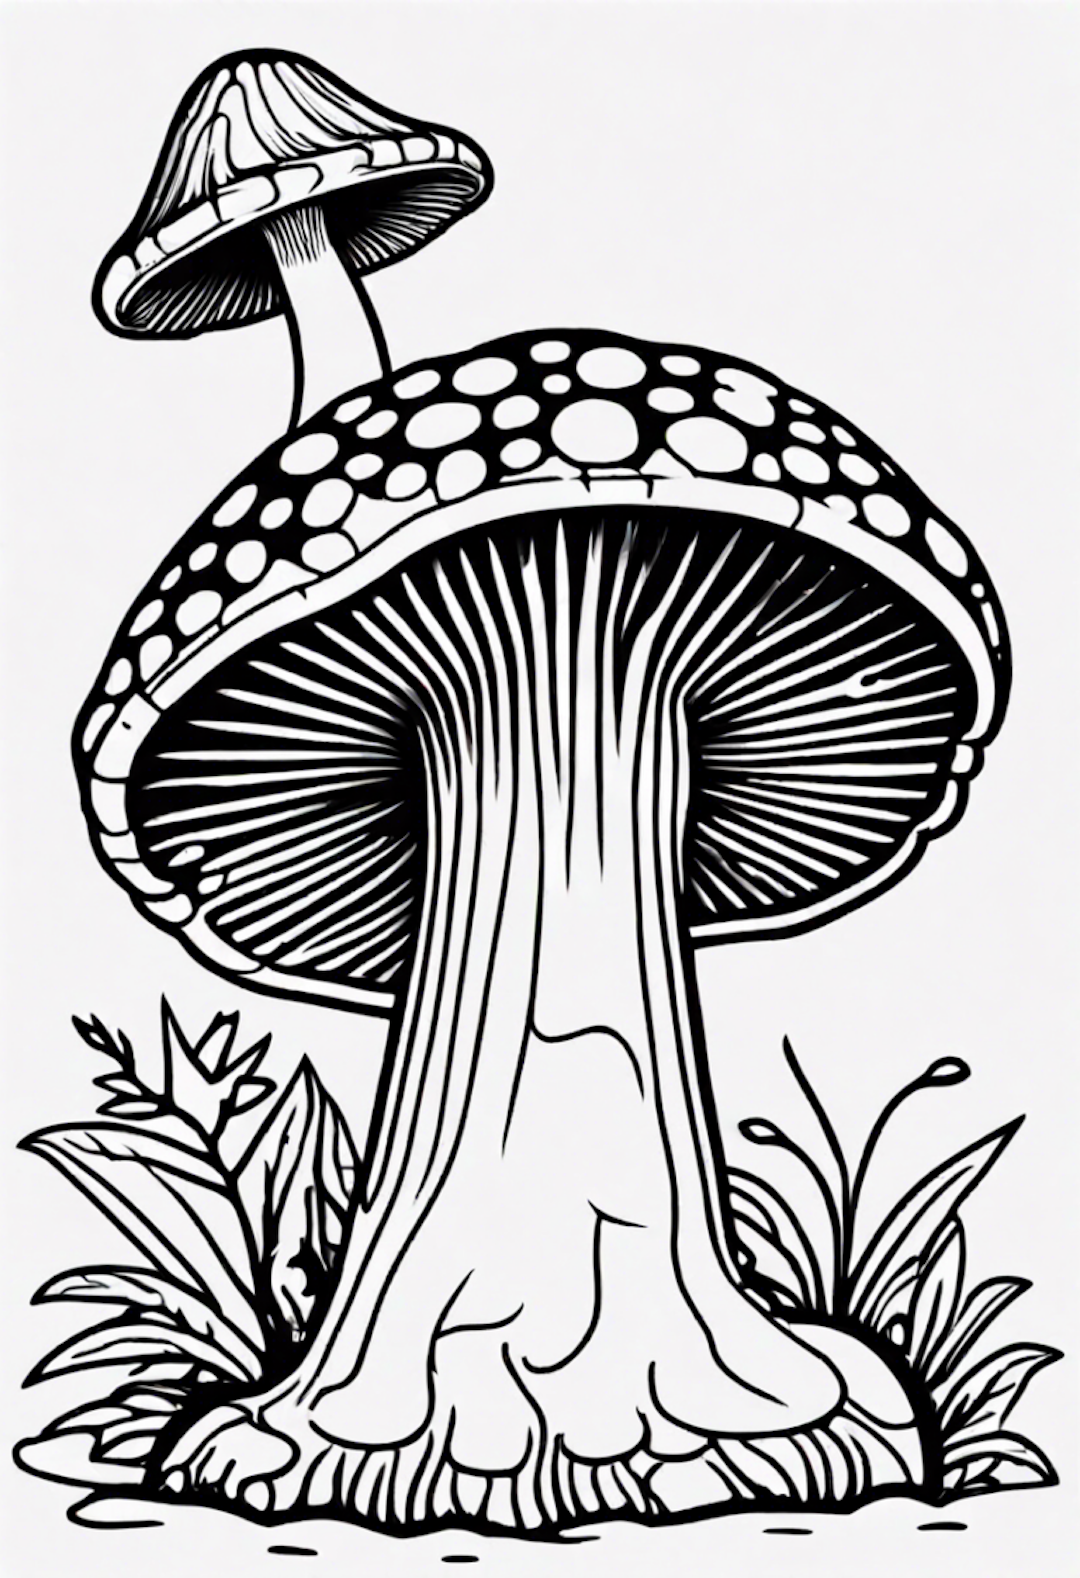 Snail Climbing On A Mushroom coloring pages